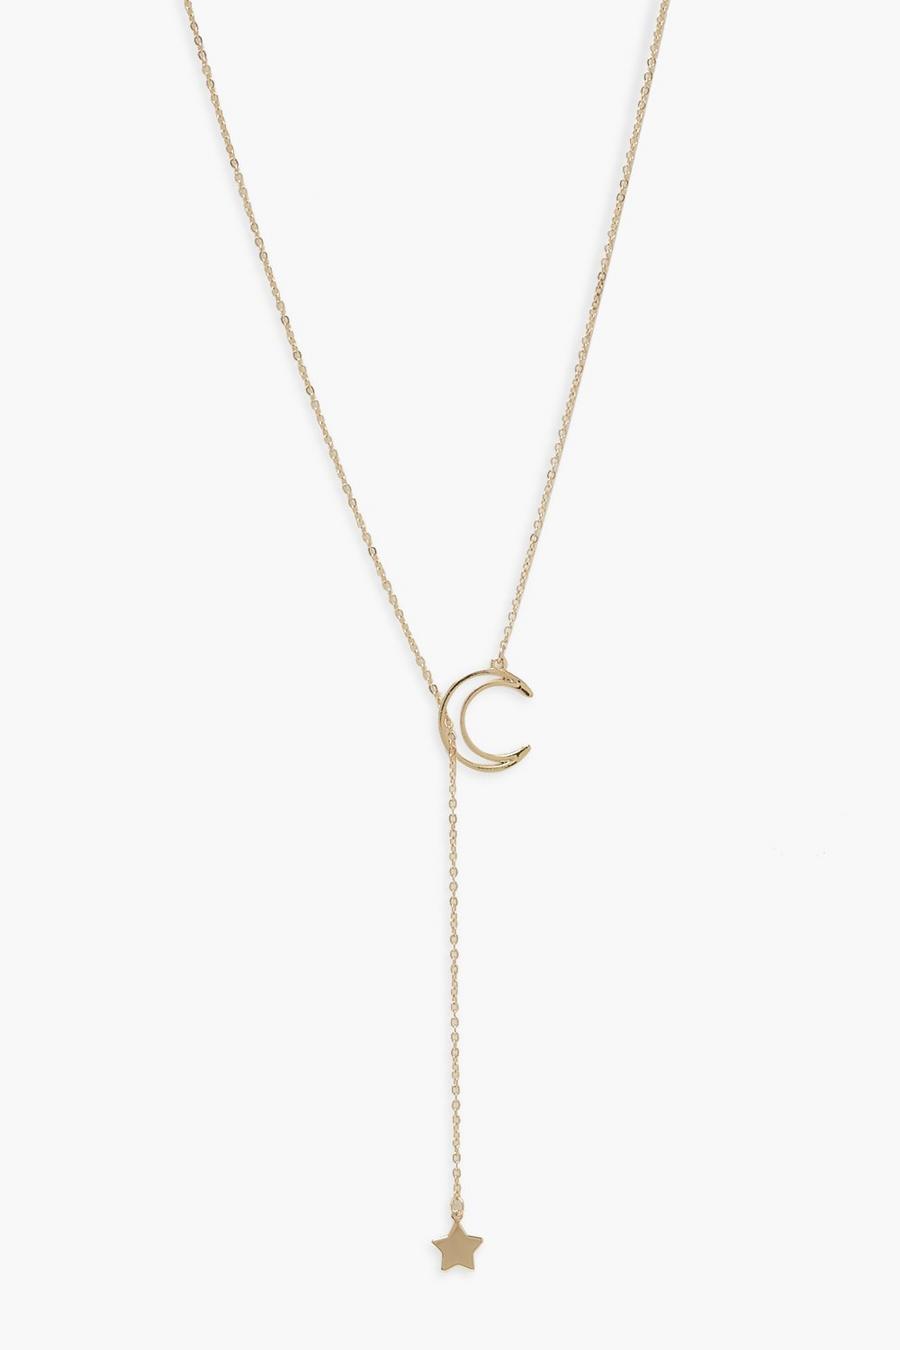 Gold Moon And Star Adjustable Necklace